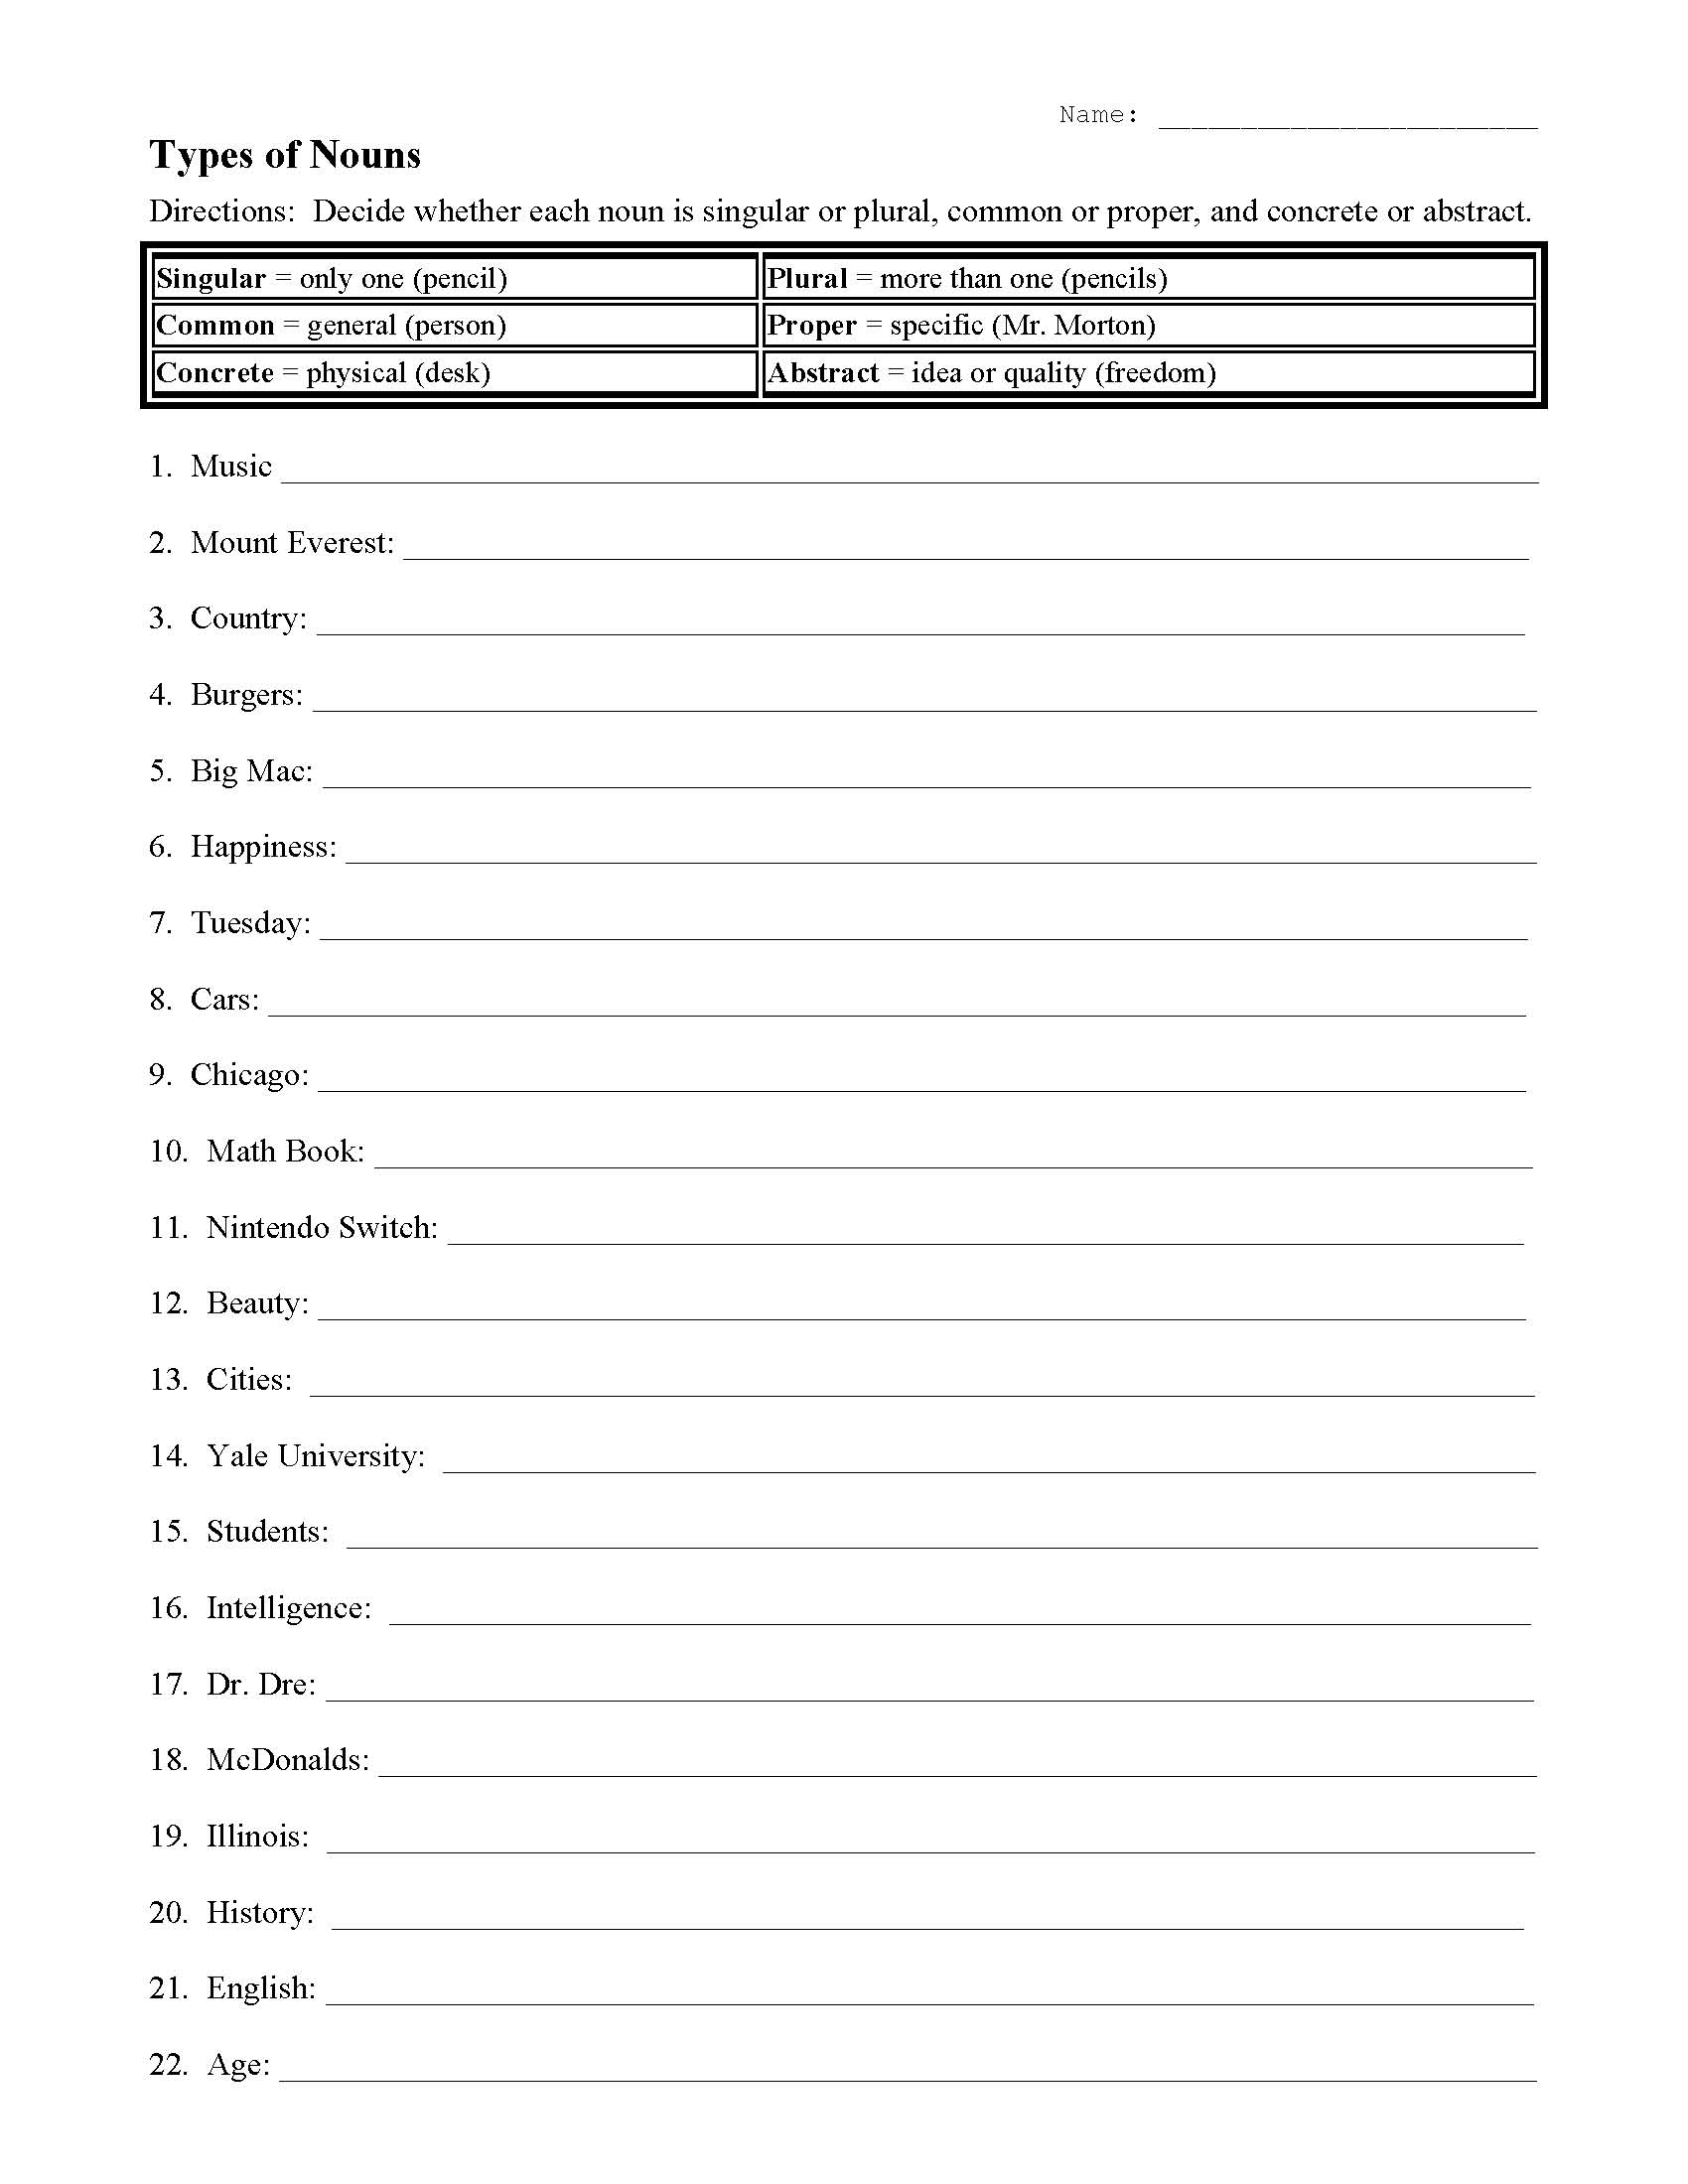 Worksheet On Types Of Nouns For Class 6